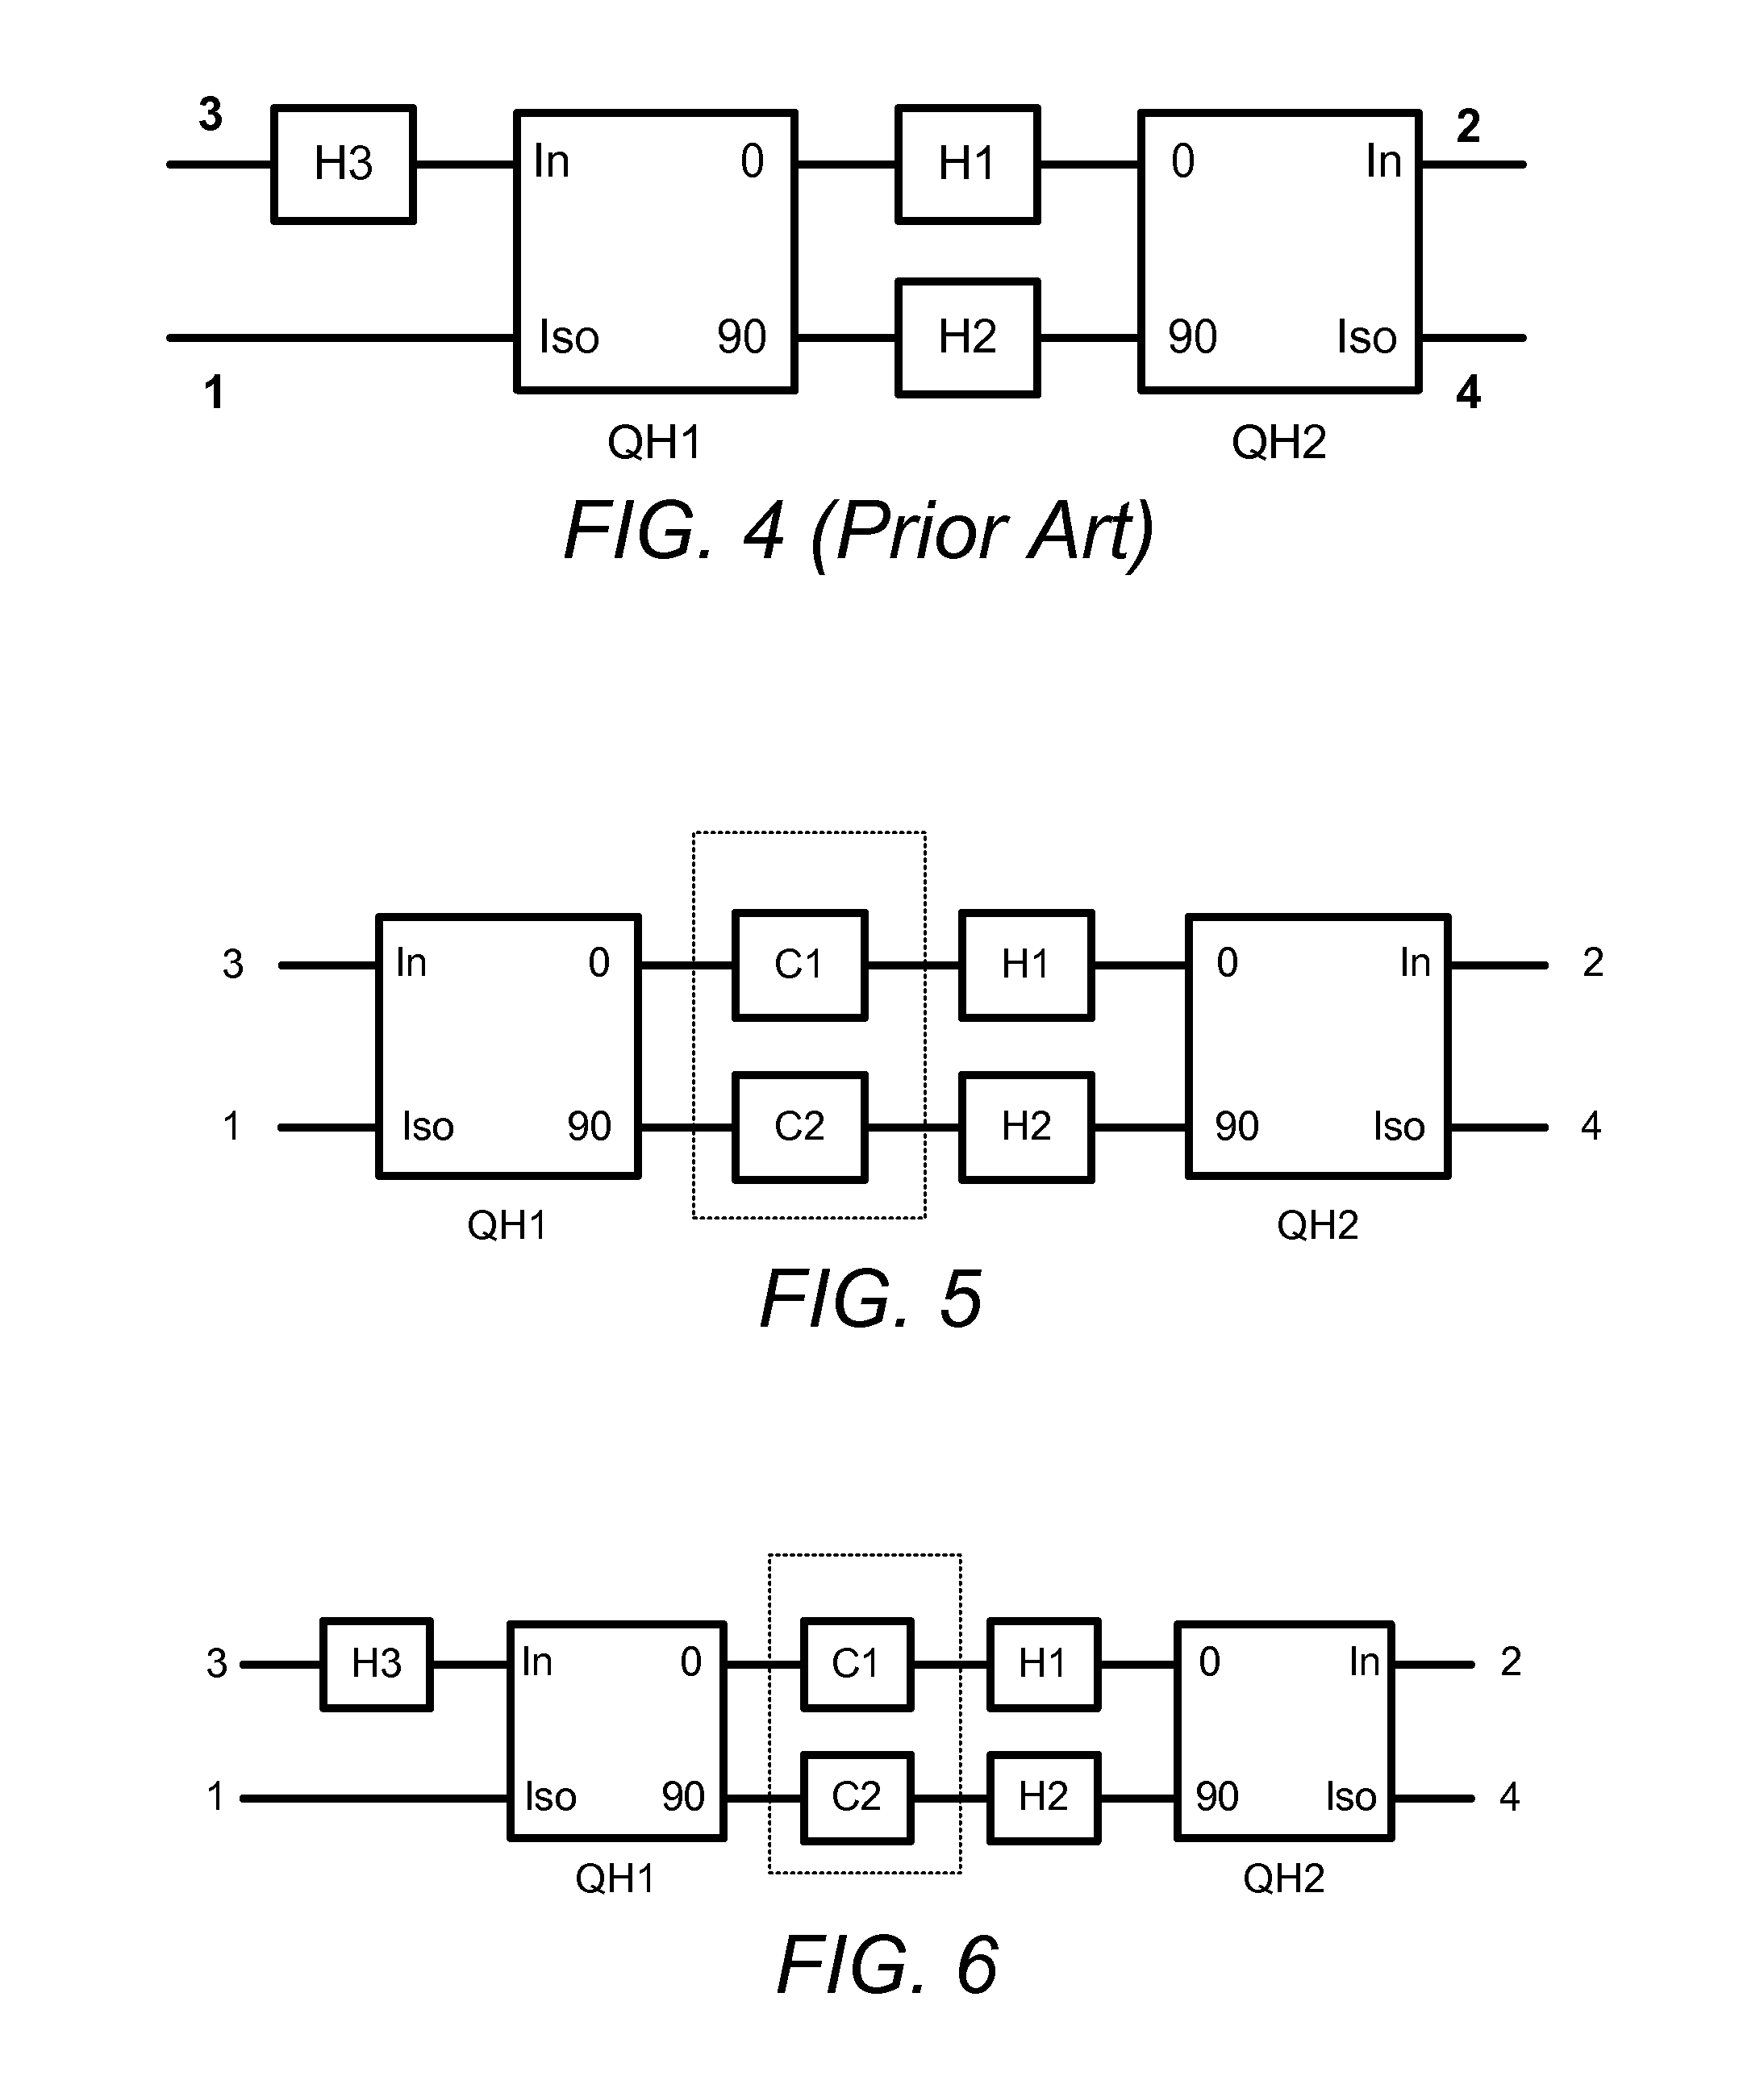 Enhancing Isolation and Impedance Matching in Hybrid-Based Cancellation Networks and Duplexers